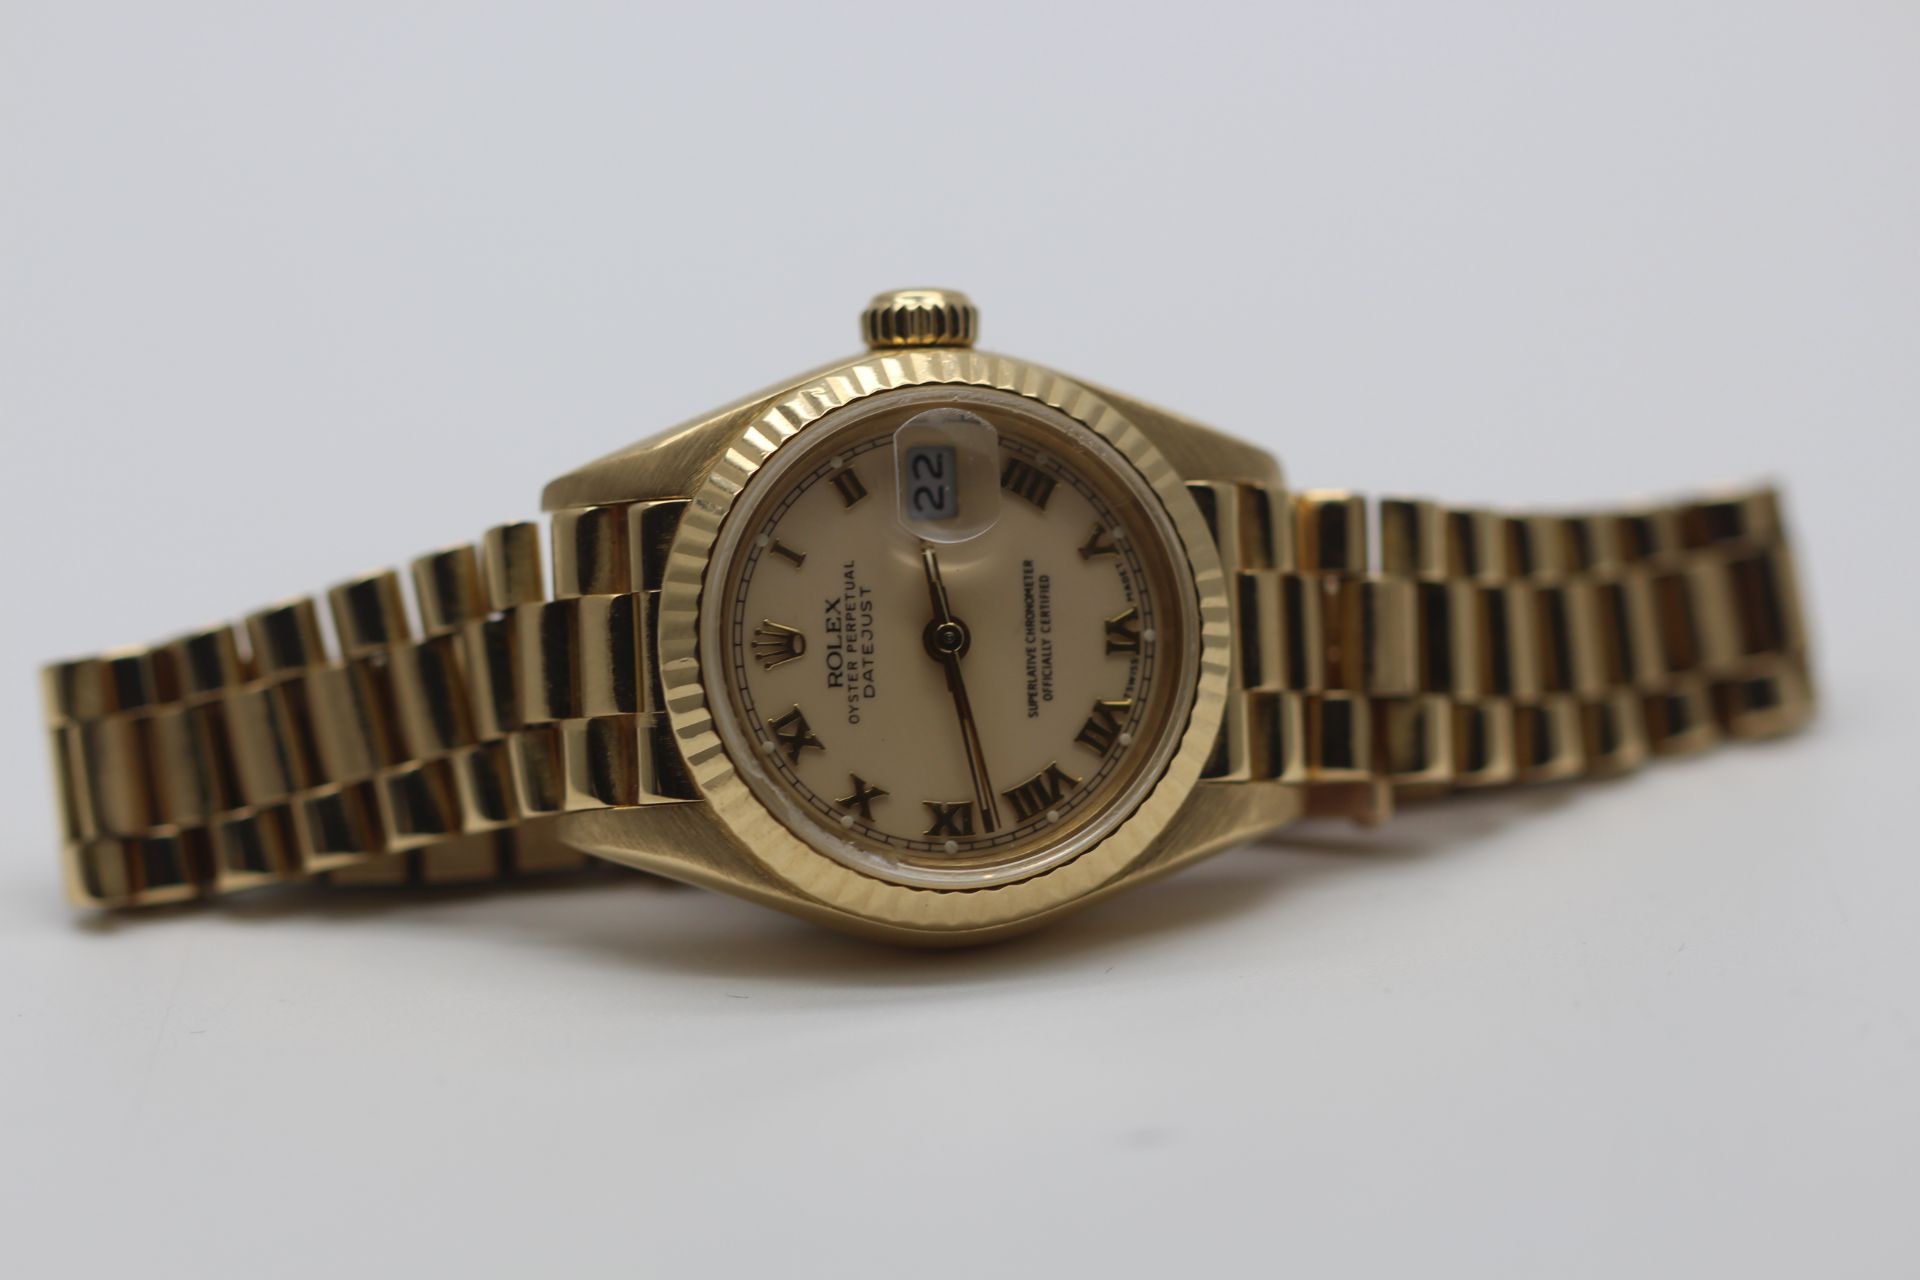 ROLEX, LADIES 18CT GOLD DATEJUST SET WITH CREME DIAL - Image 2 of 9